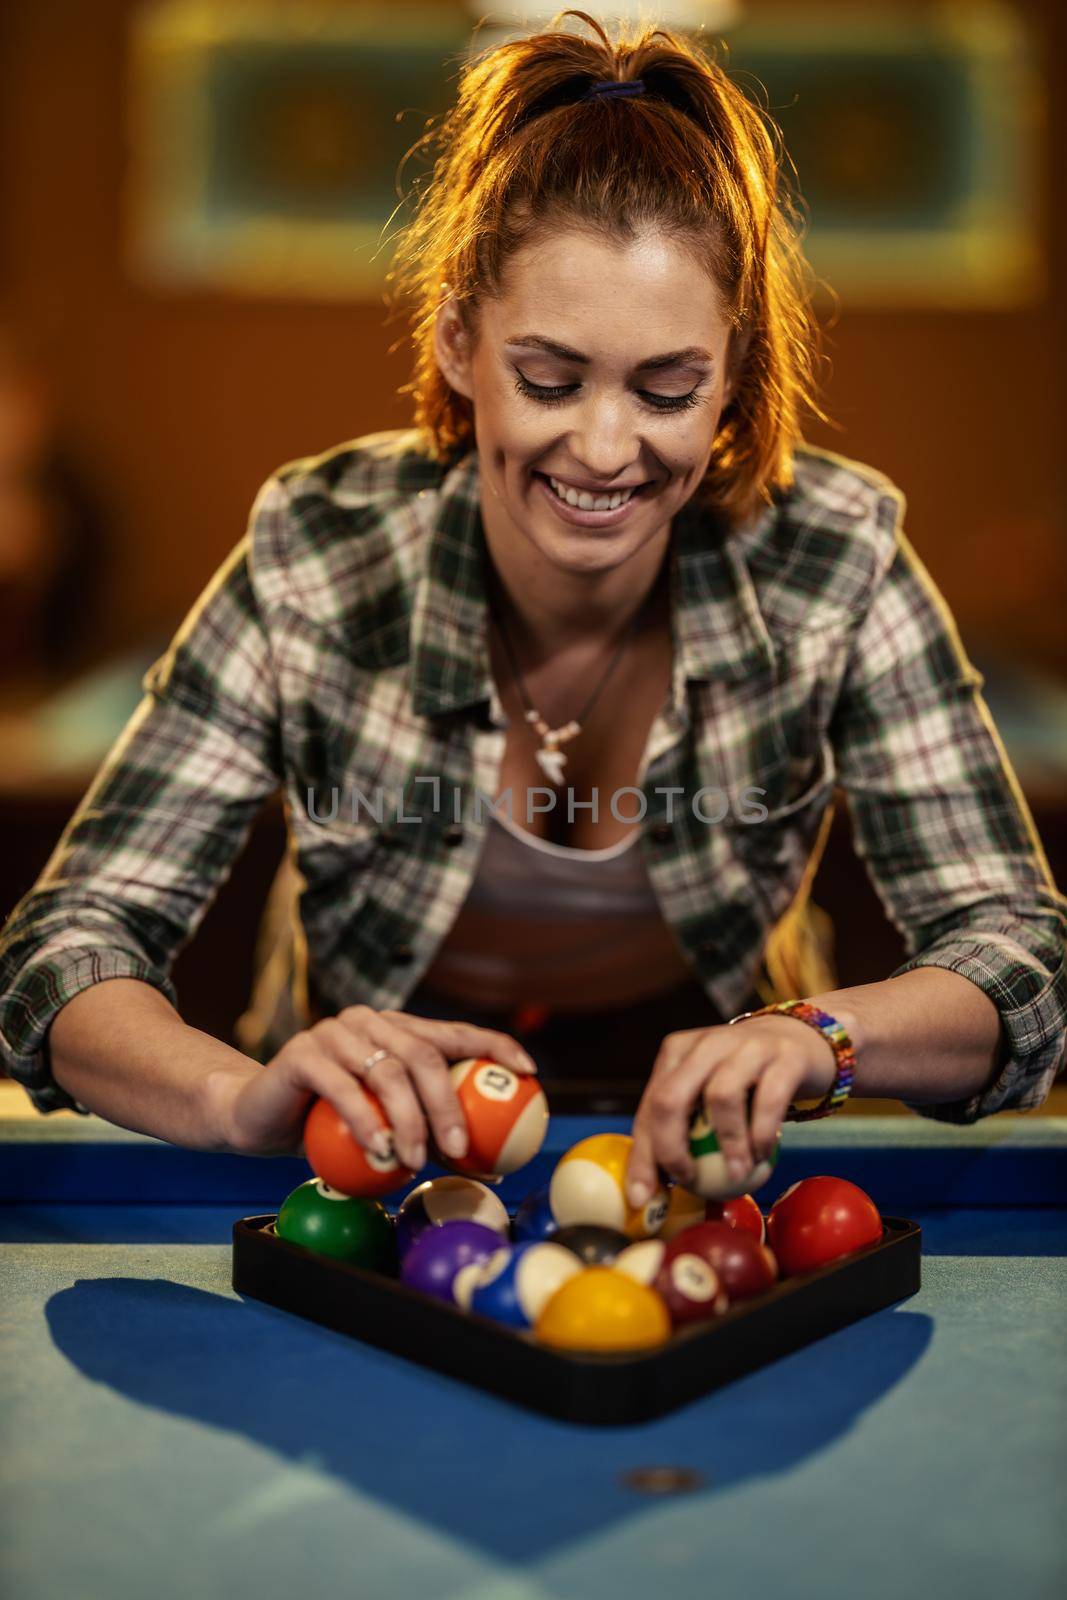 A young smiling woman places billiard balls on a pool table to play.